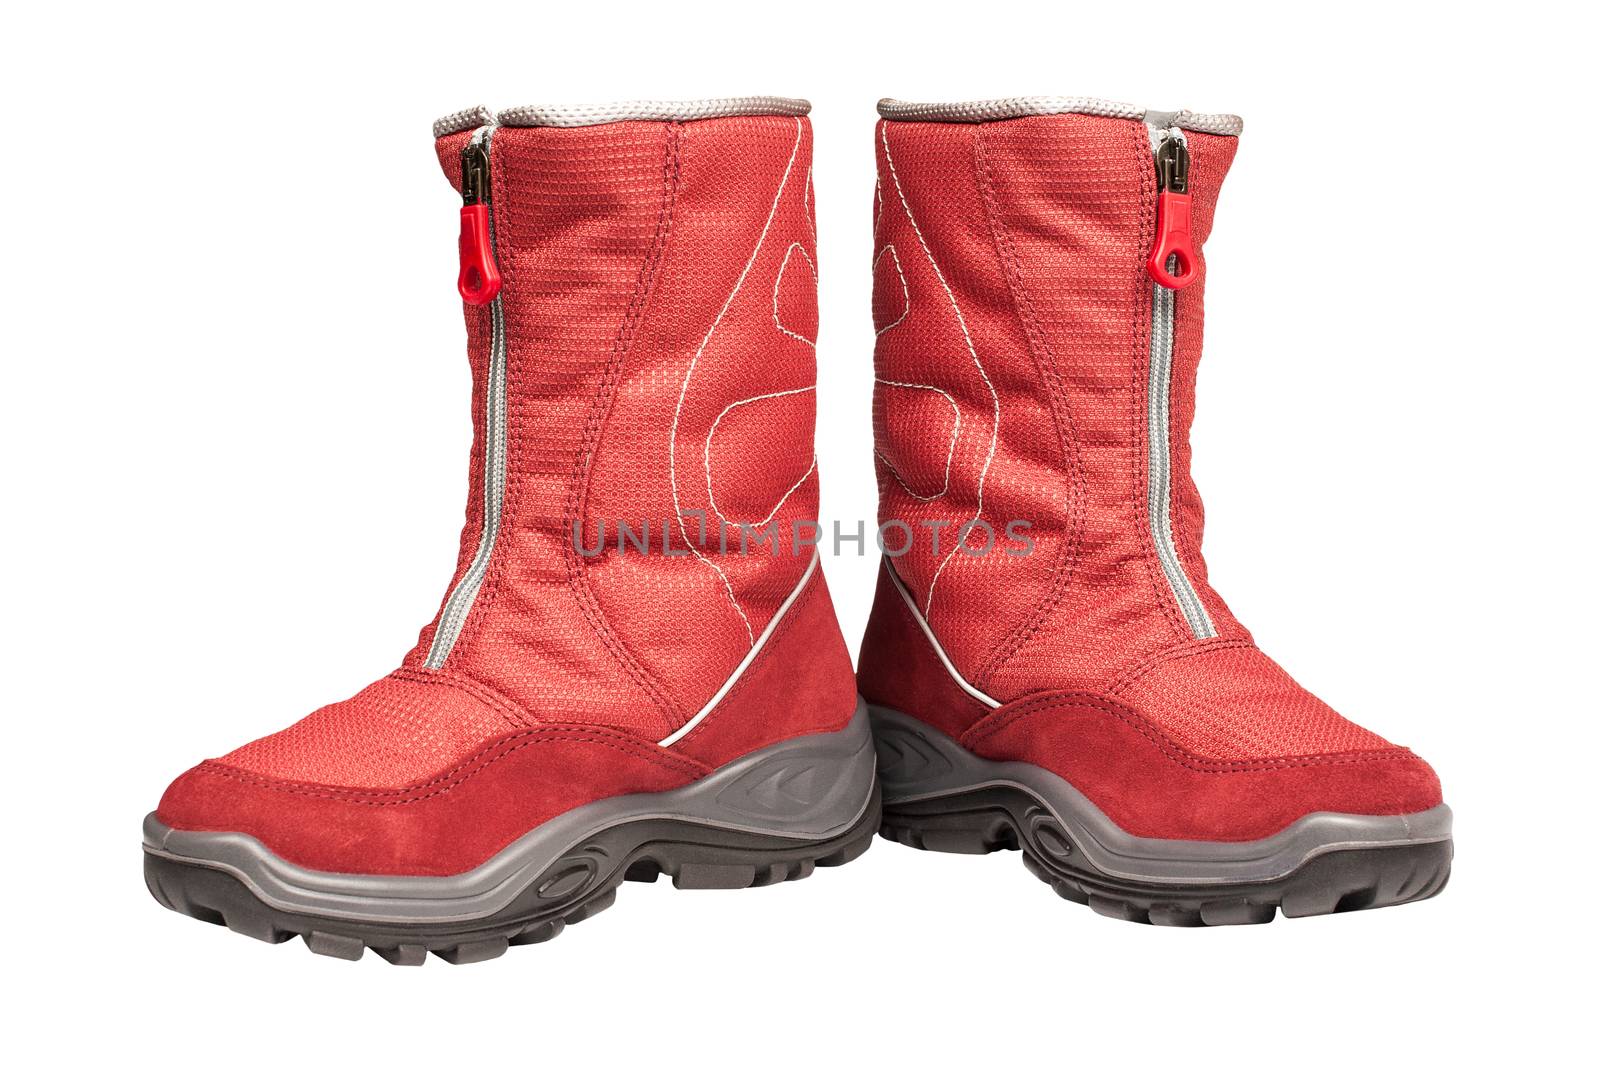 children's red waterproof boots on a white background by abelikov